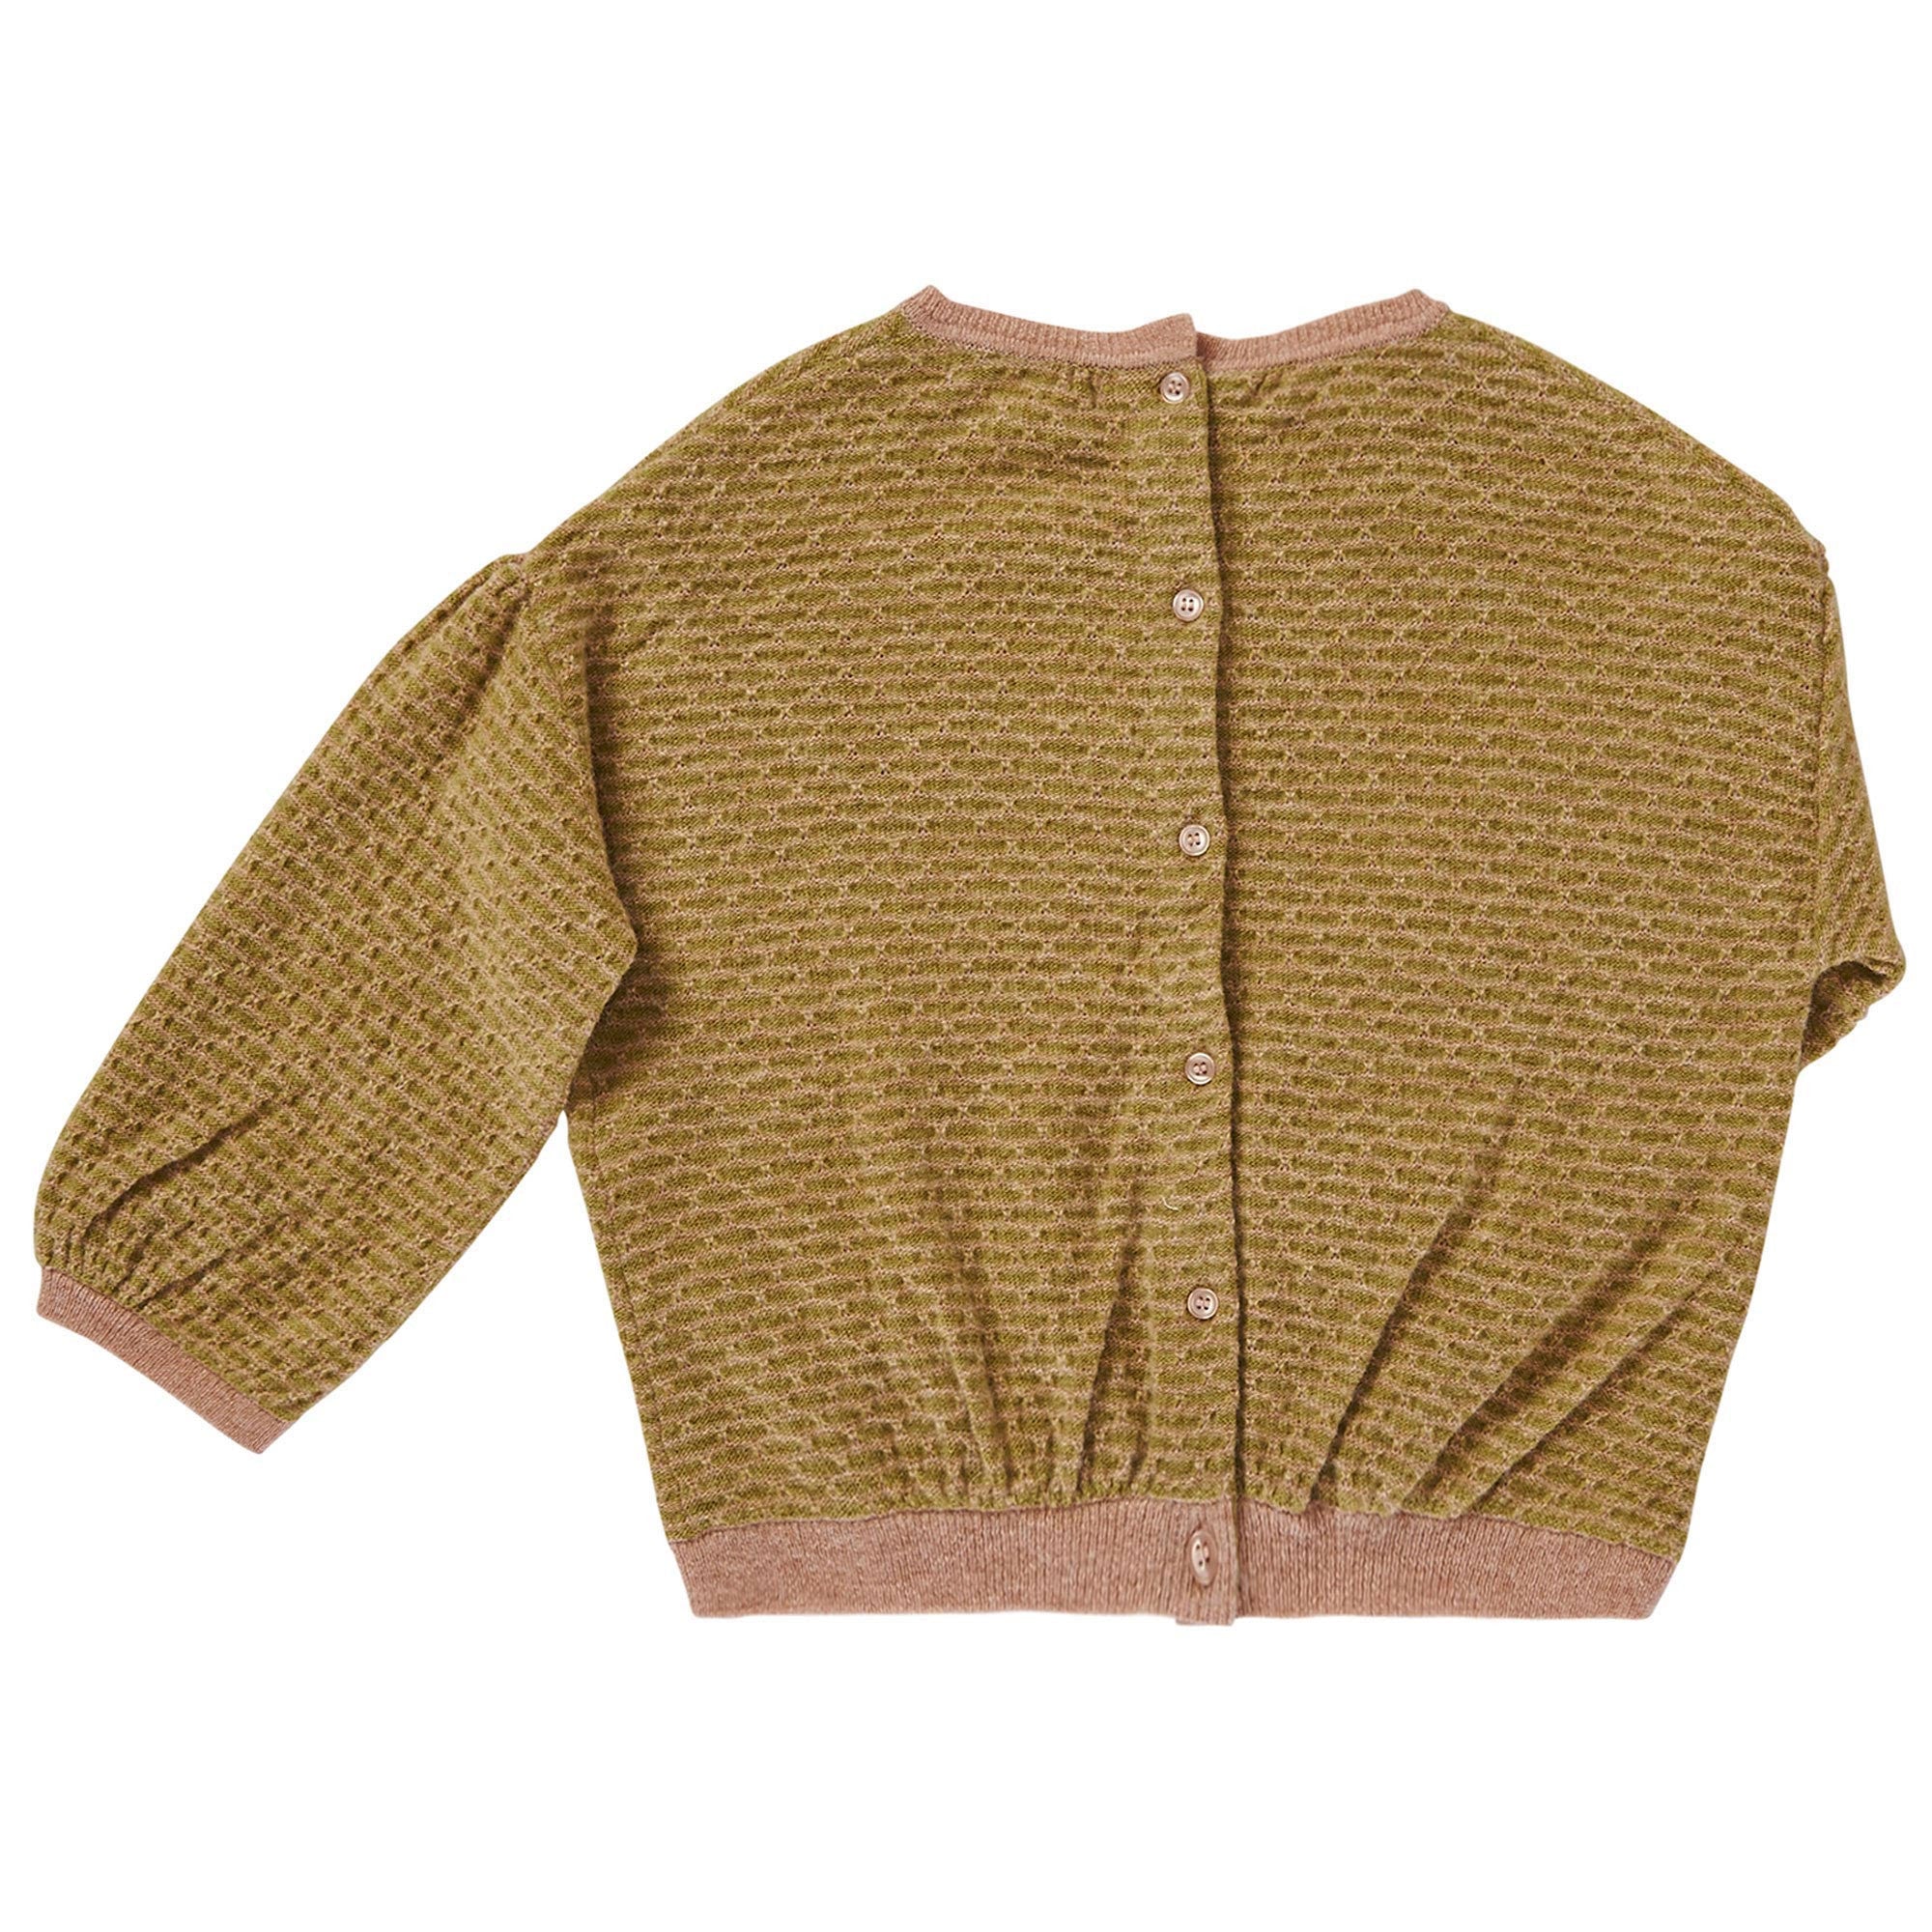 Boys Yellow-green Knitted Wool Sweater - CÉMAROSE | Children's Fashion Store - 2